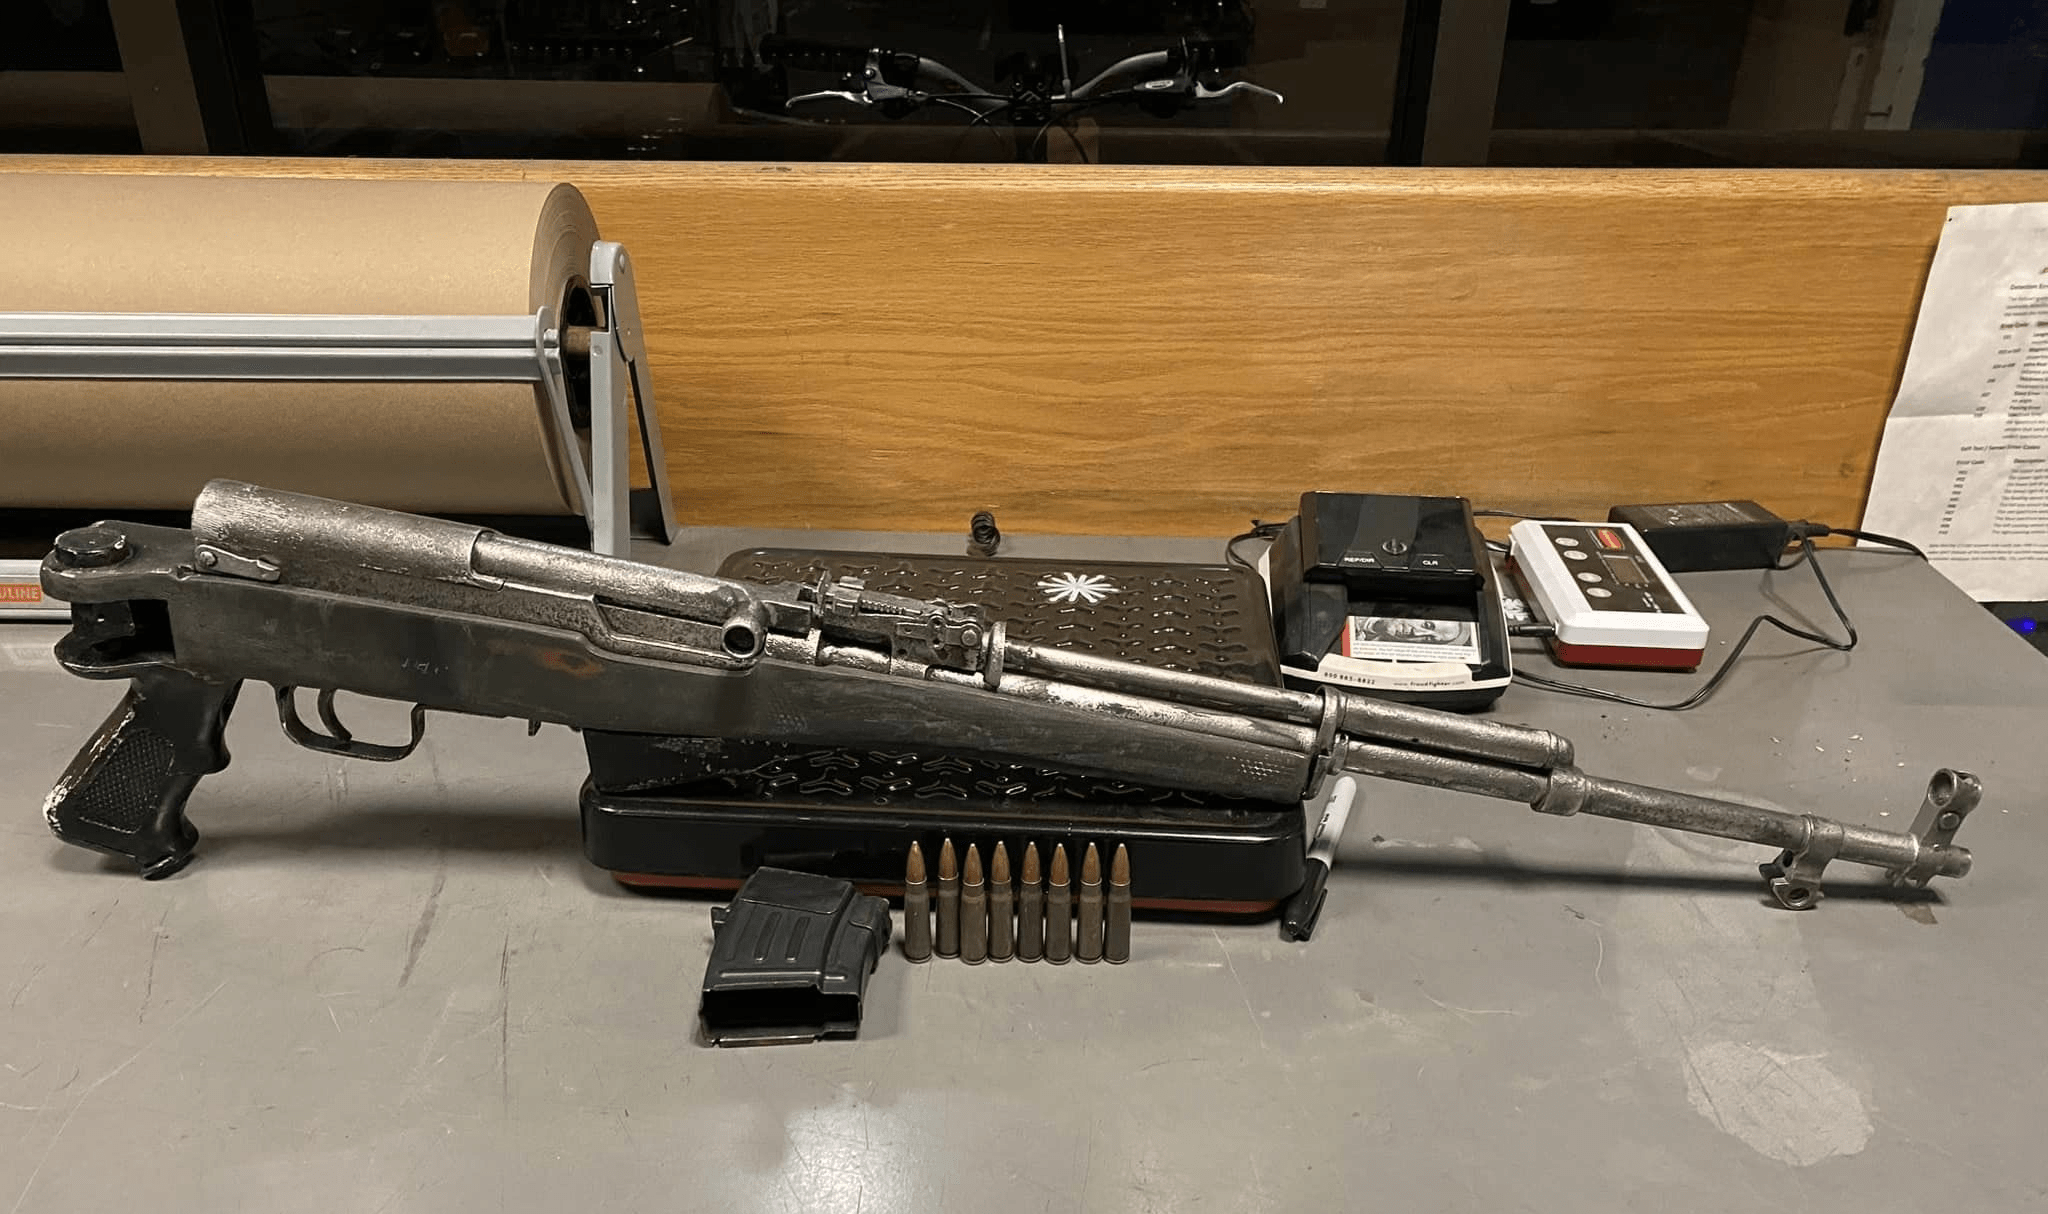 rifle-confiscated-from-jose-torrestepuri-santa-rosa-police